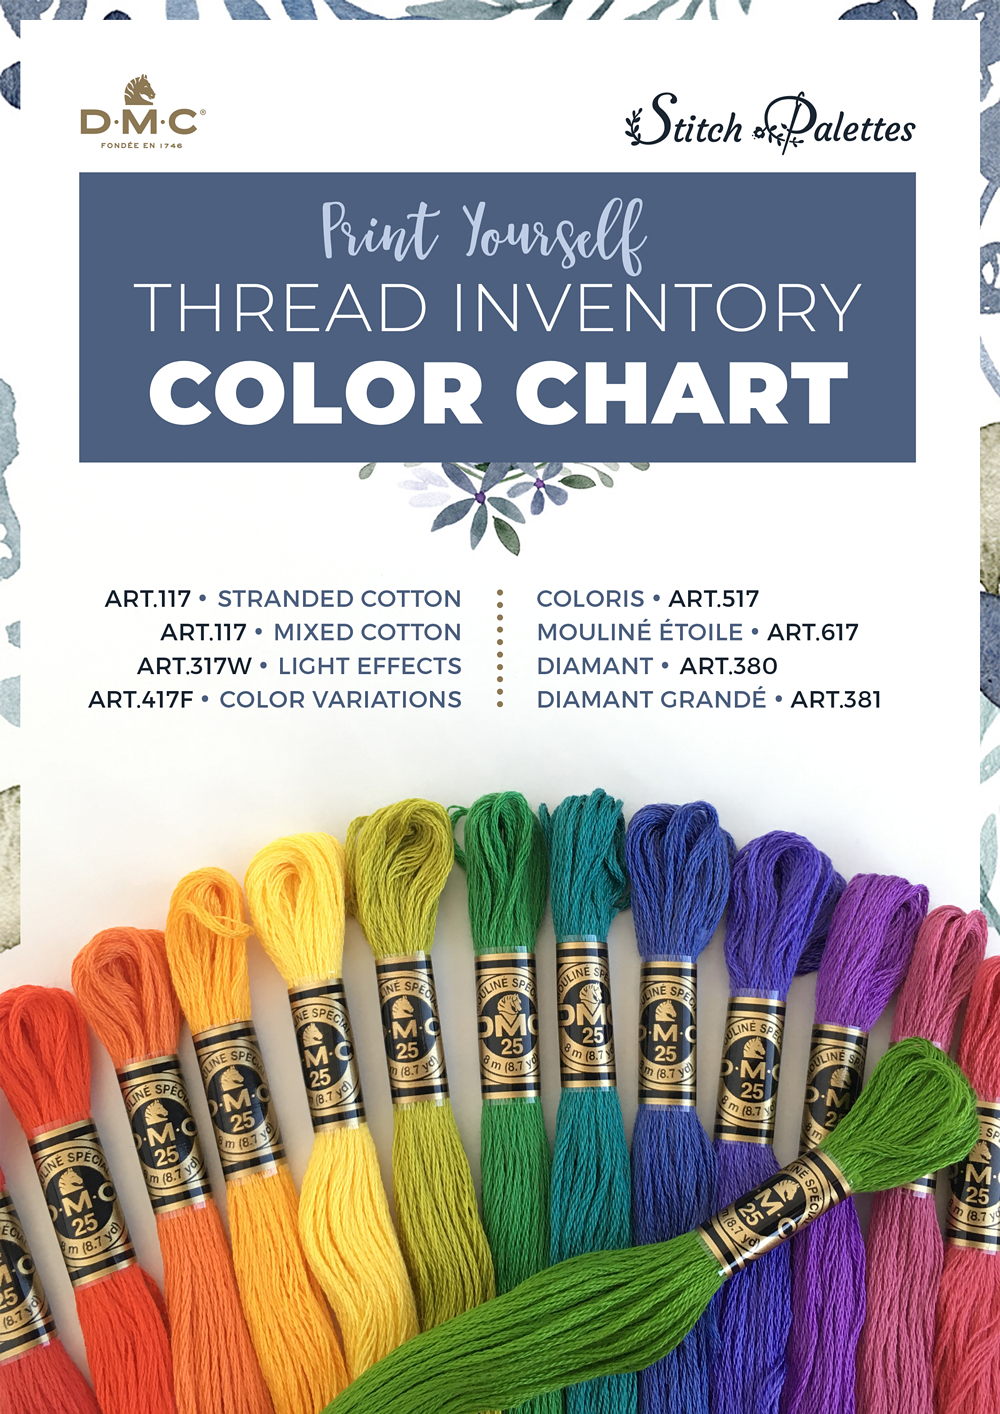 Thread inventory color chart